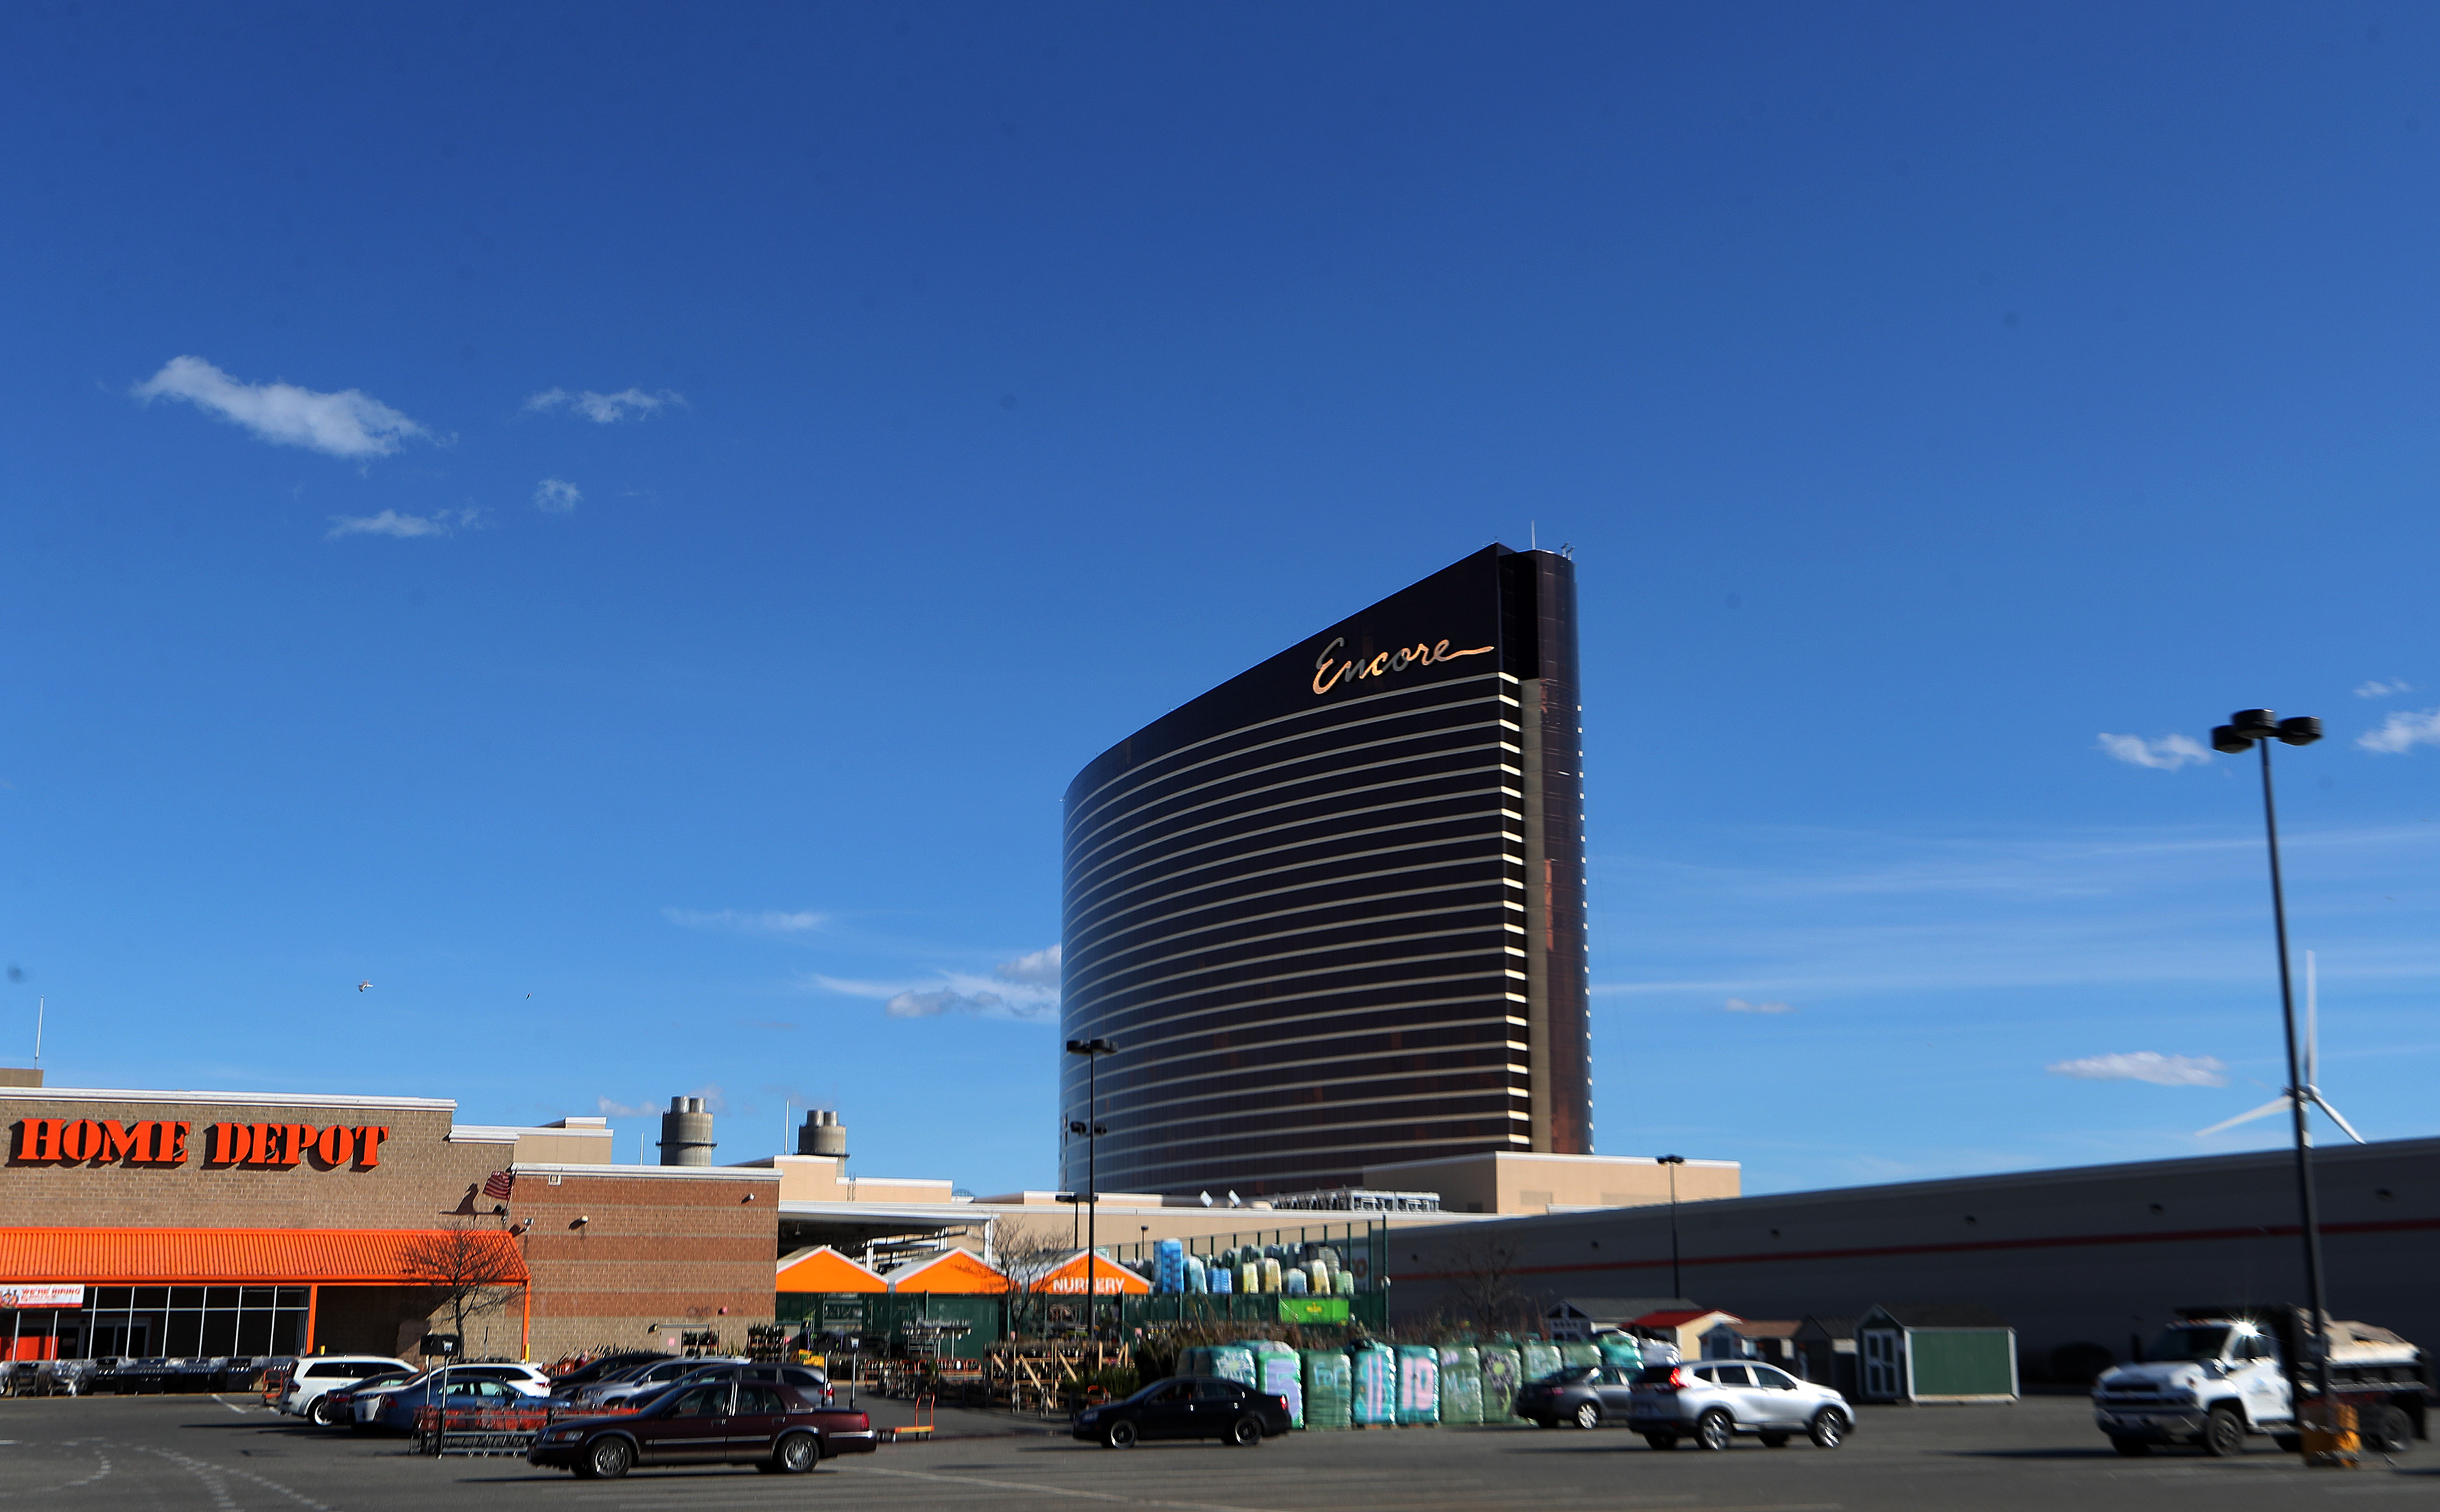 A large, rectangular, and curved building looming over a parking lot. 